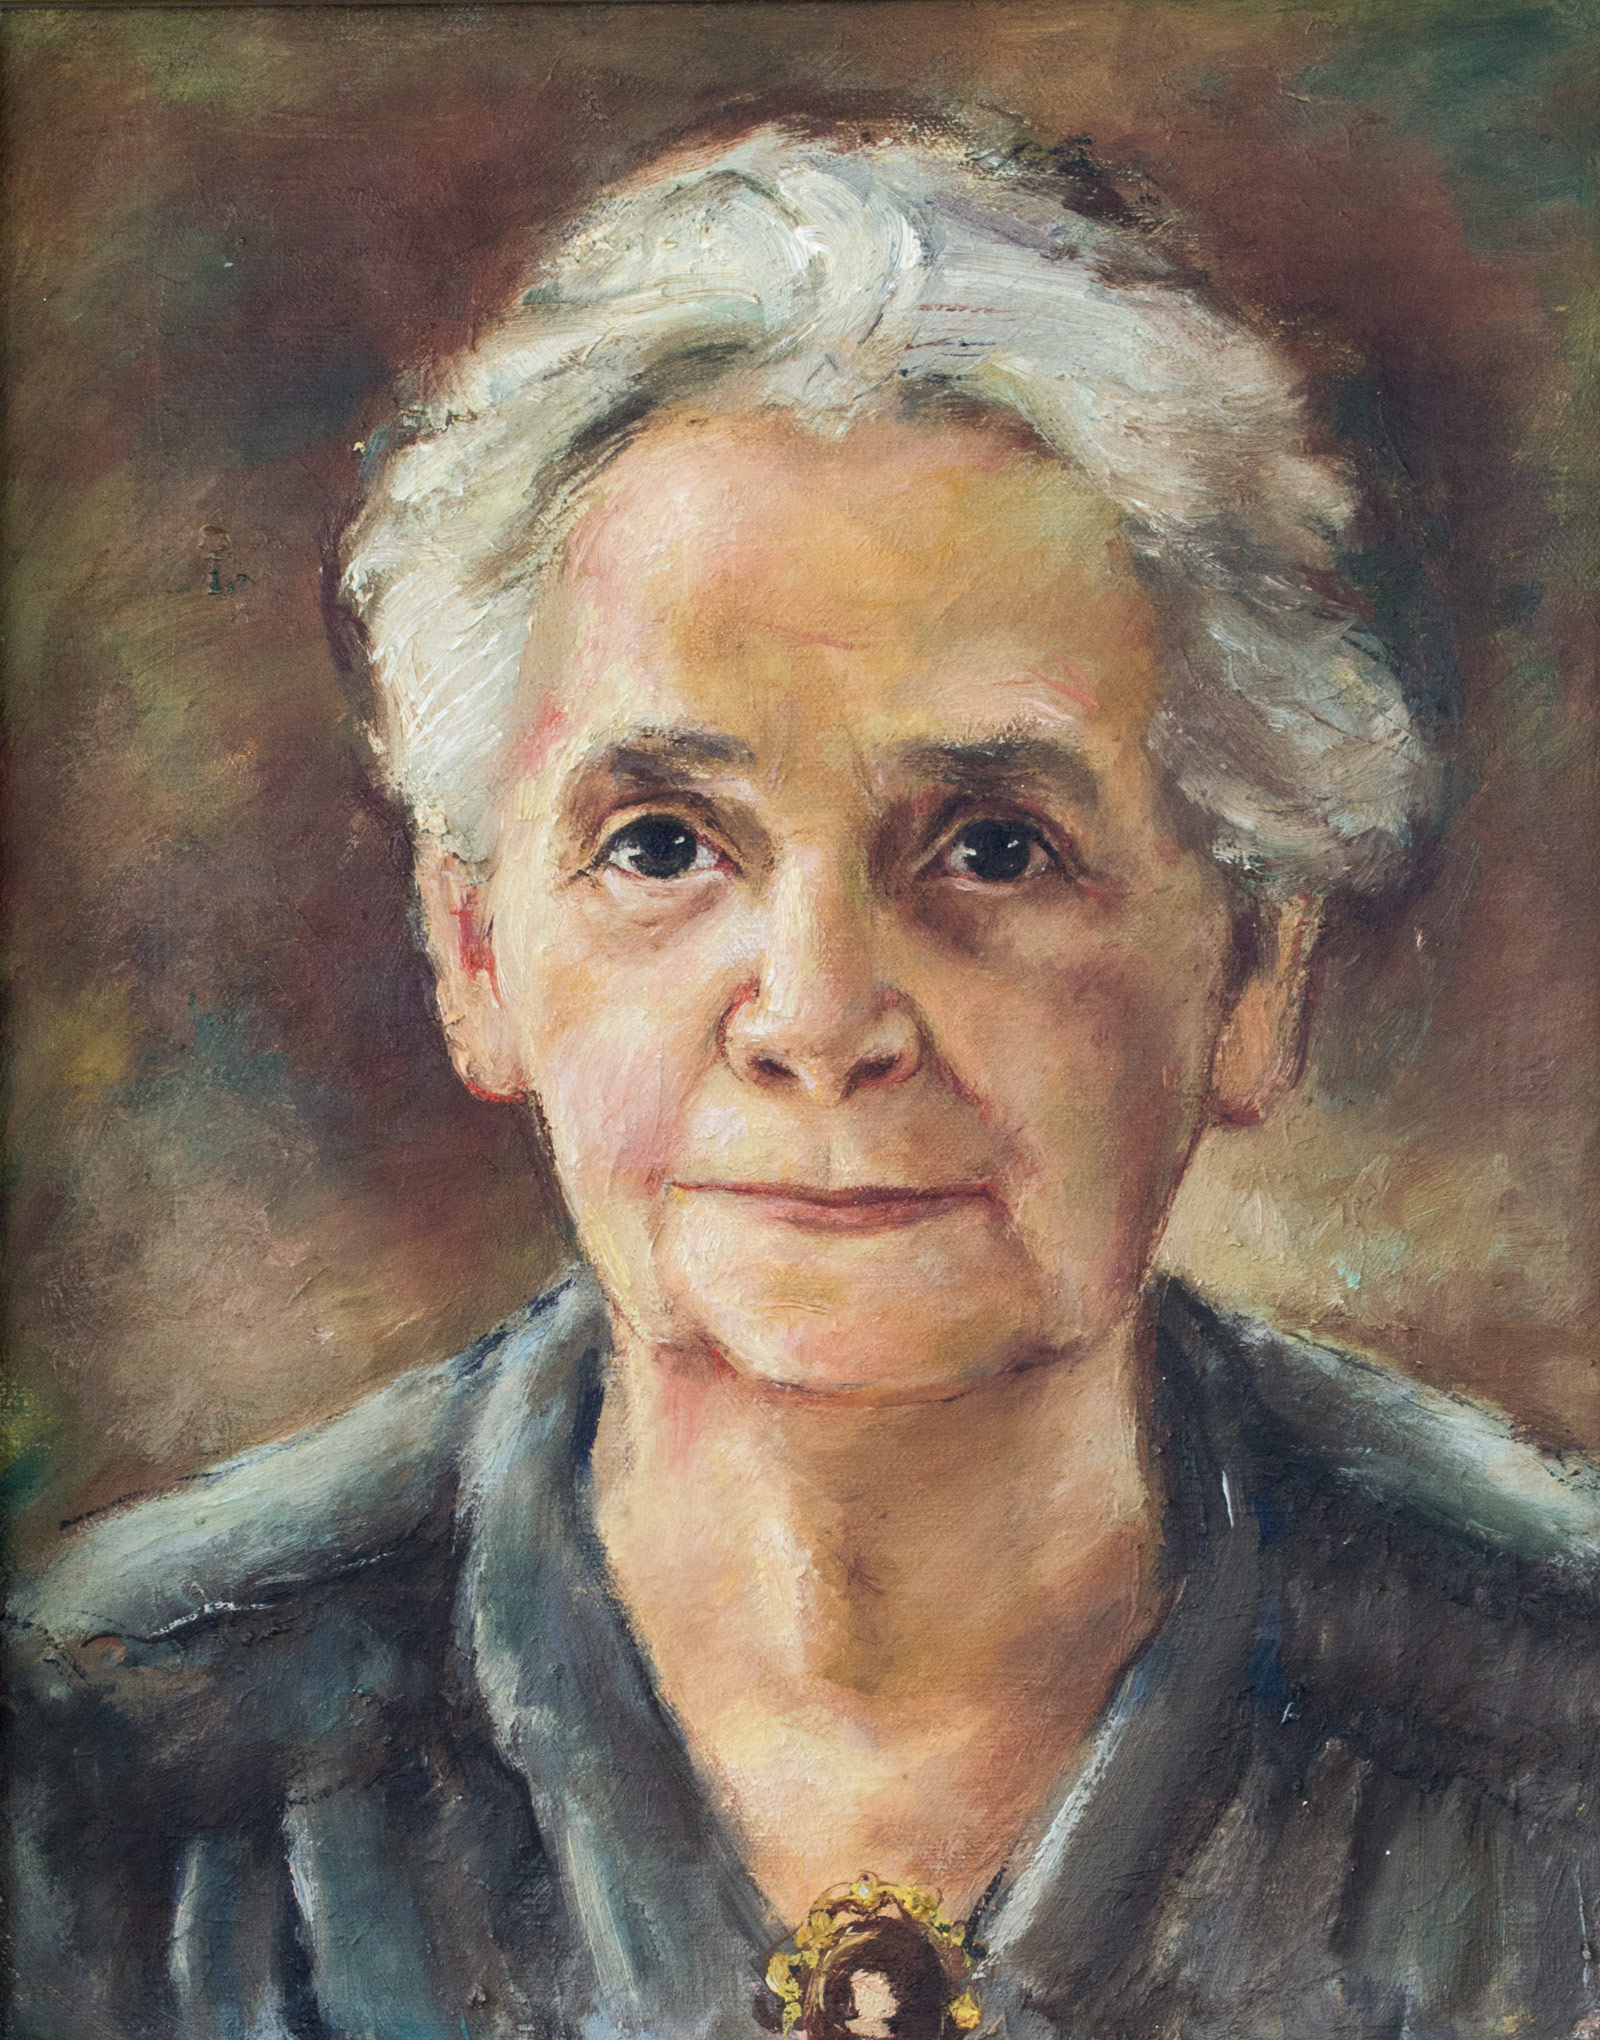 Nellie Frazier, 1944, 12" x 15", Oil on canvas